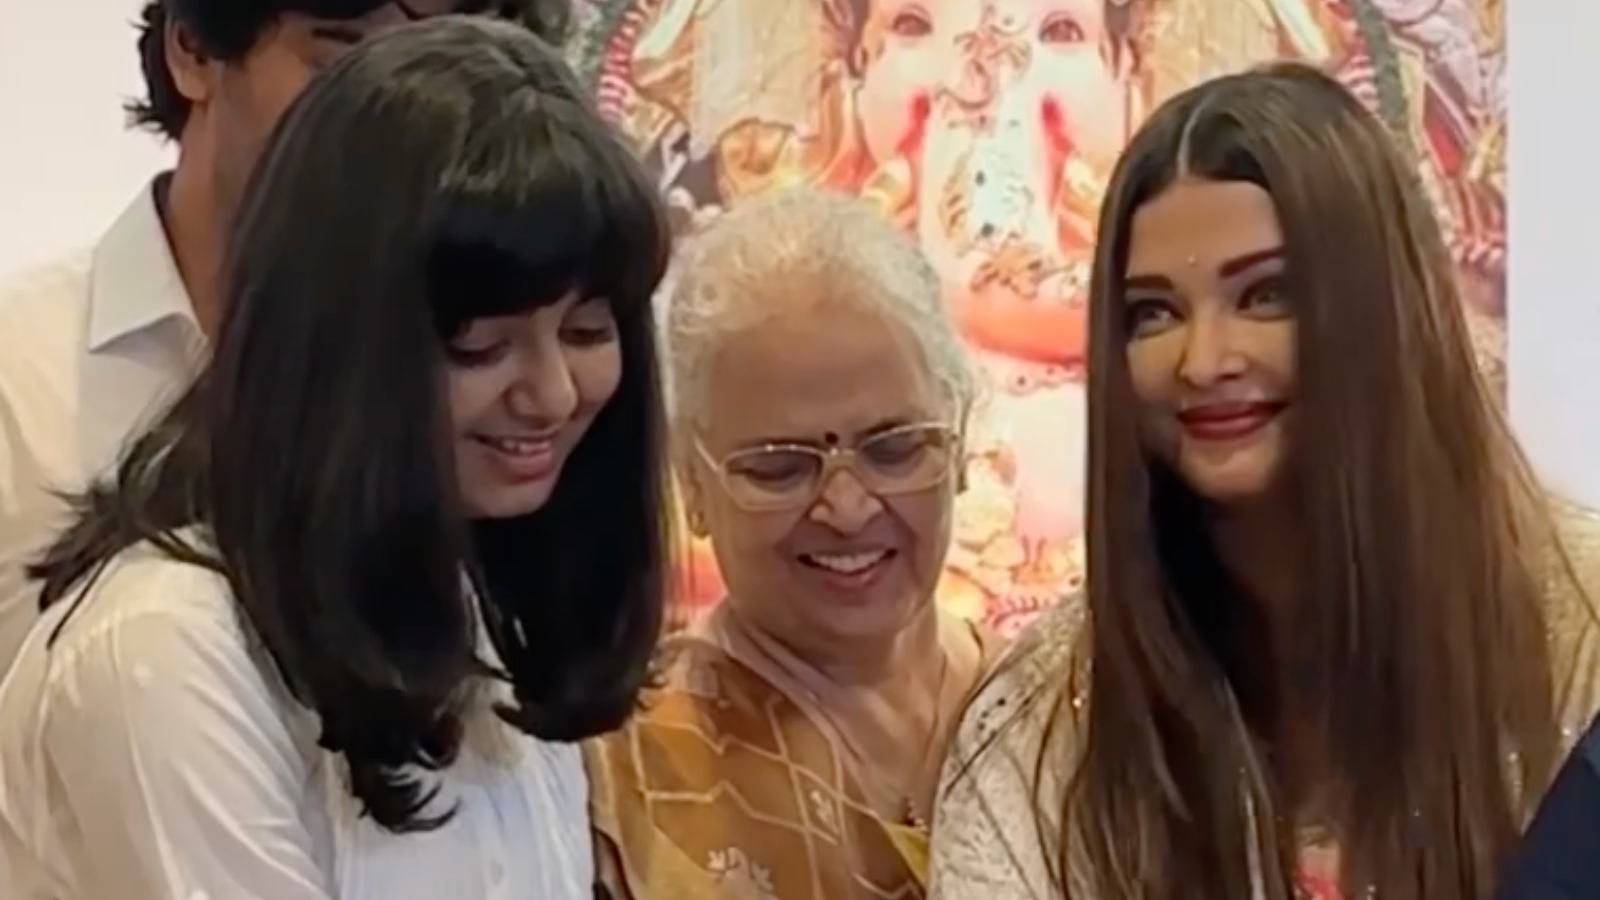 Aishwarya Rai Sexy Nagi Hd Image Video - Aishwarya Rai cuts birthday cake at an event with daughter Aaradhya  Bachchan, refuses to eat as she is observing Karva Chauth. Watch video |  Bollywood News - The Indian Express